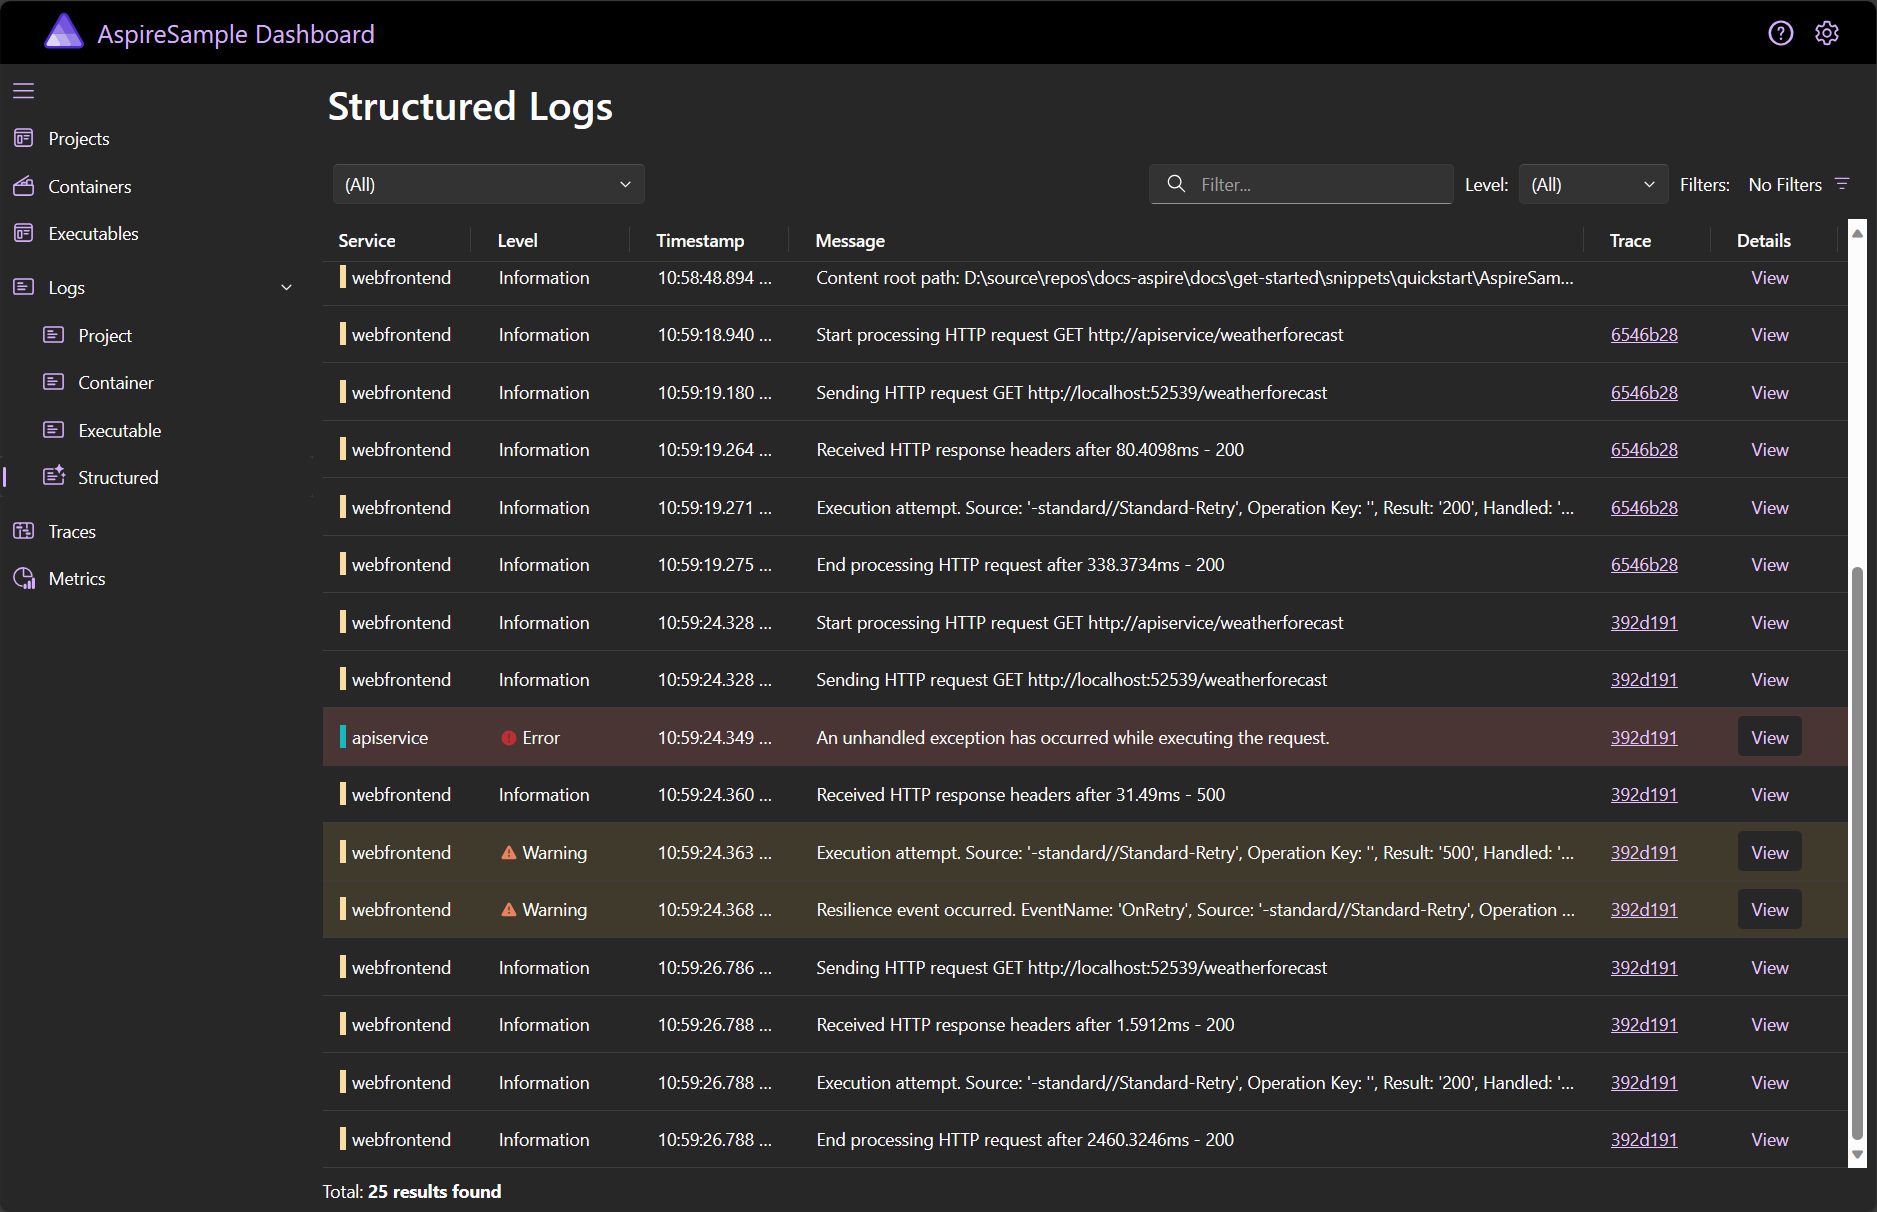 A screenshot of the .NET Aspire dashboard Structured logs page, showing a filter applied to show only the logs relevant to the trace.